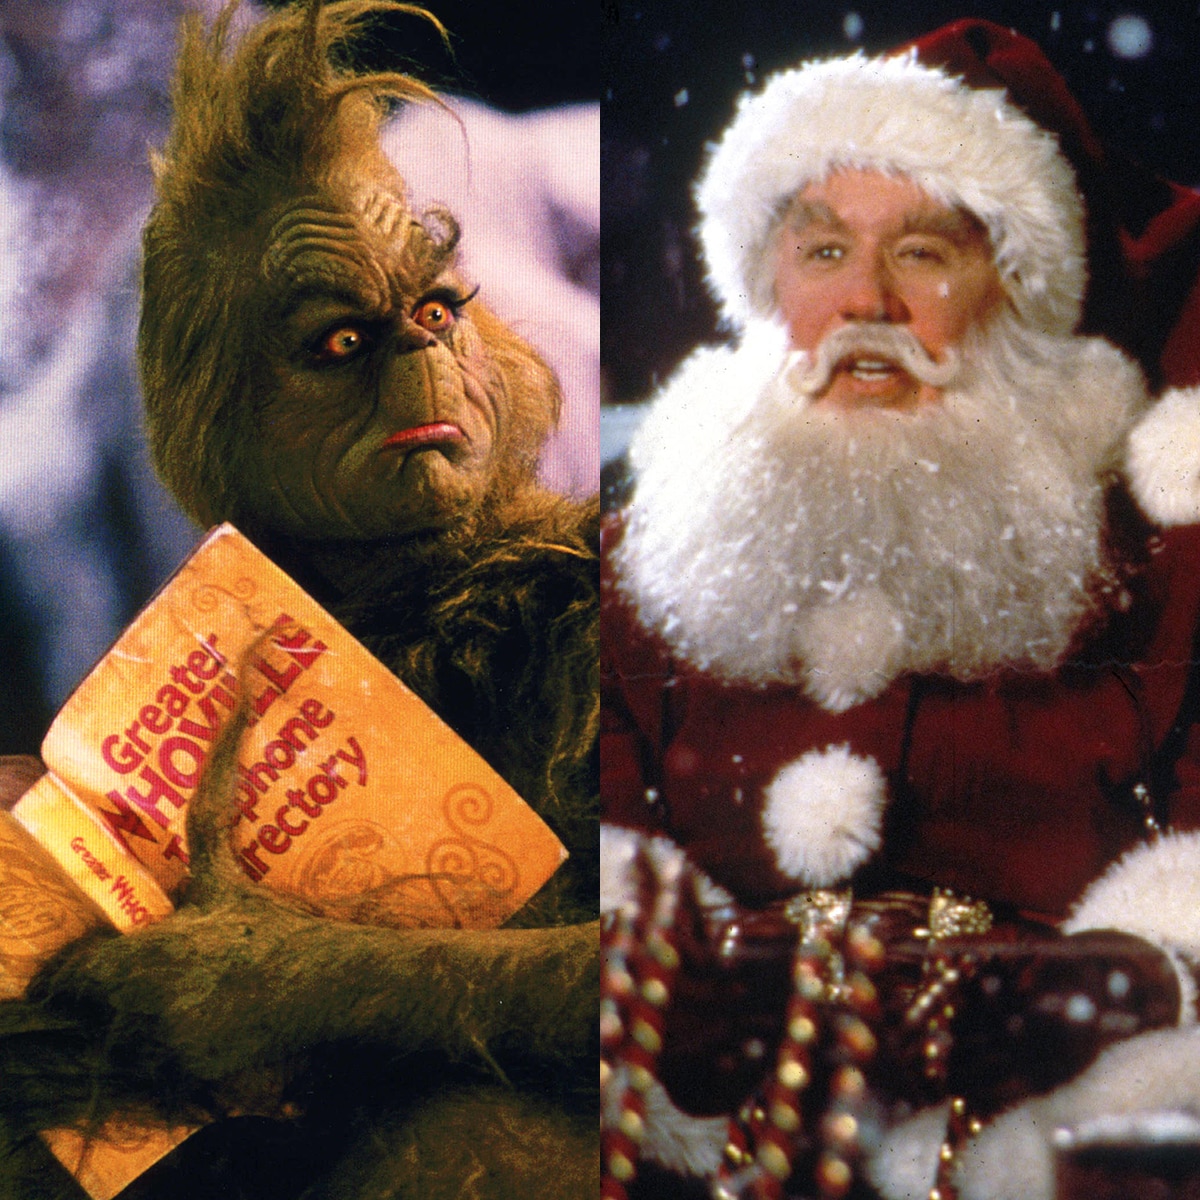 The Grinch, The Santa Clause